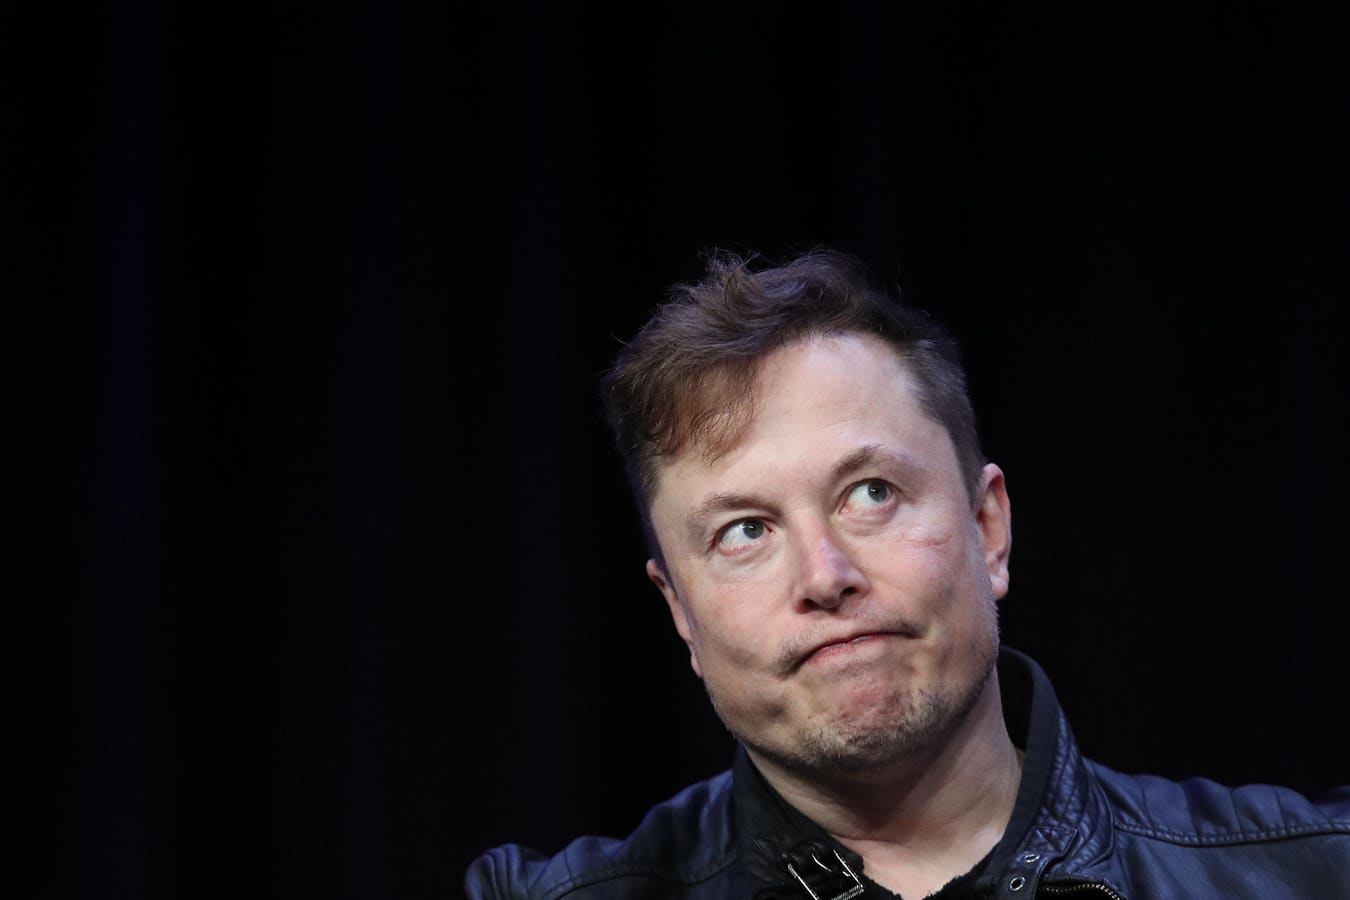 Elon Musk Is No Speech Champion After Canceling Deal With Don Lemon